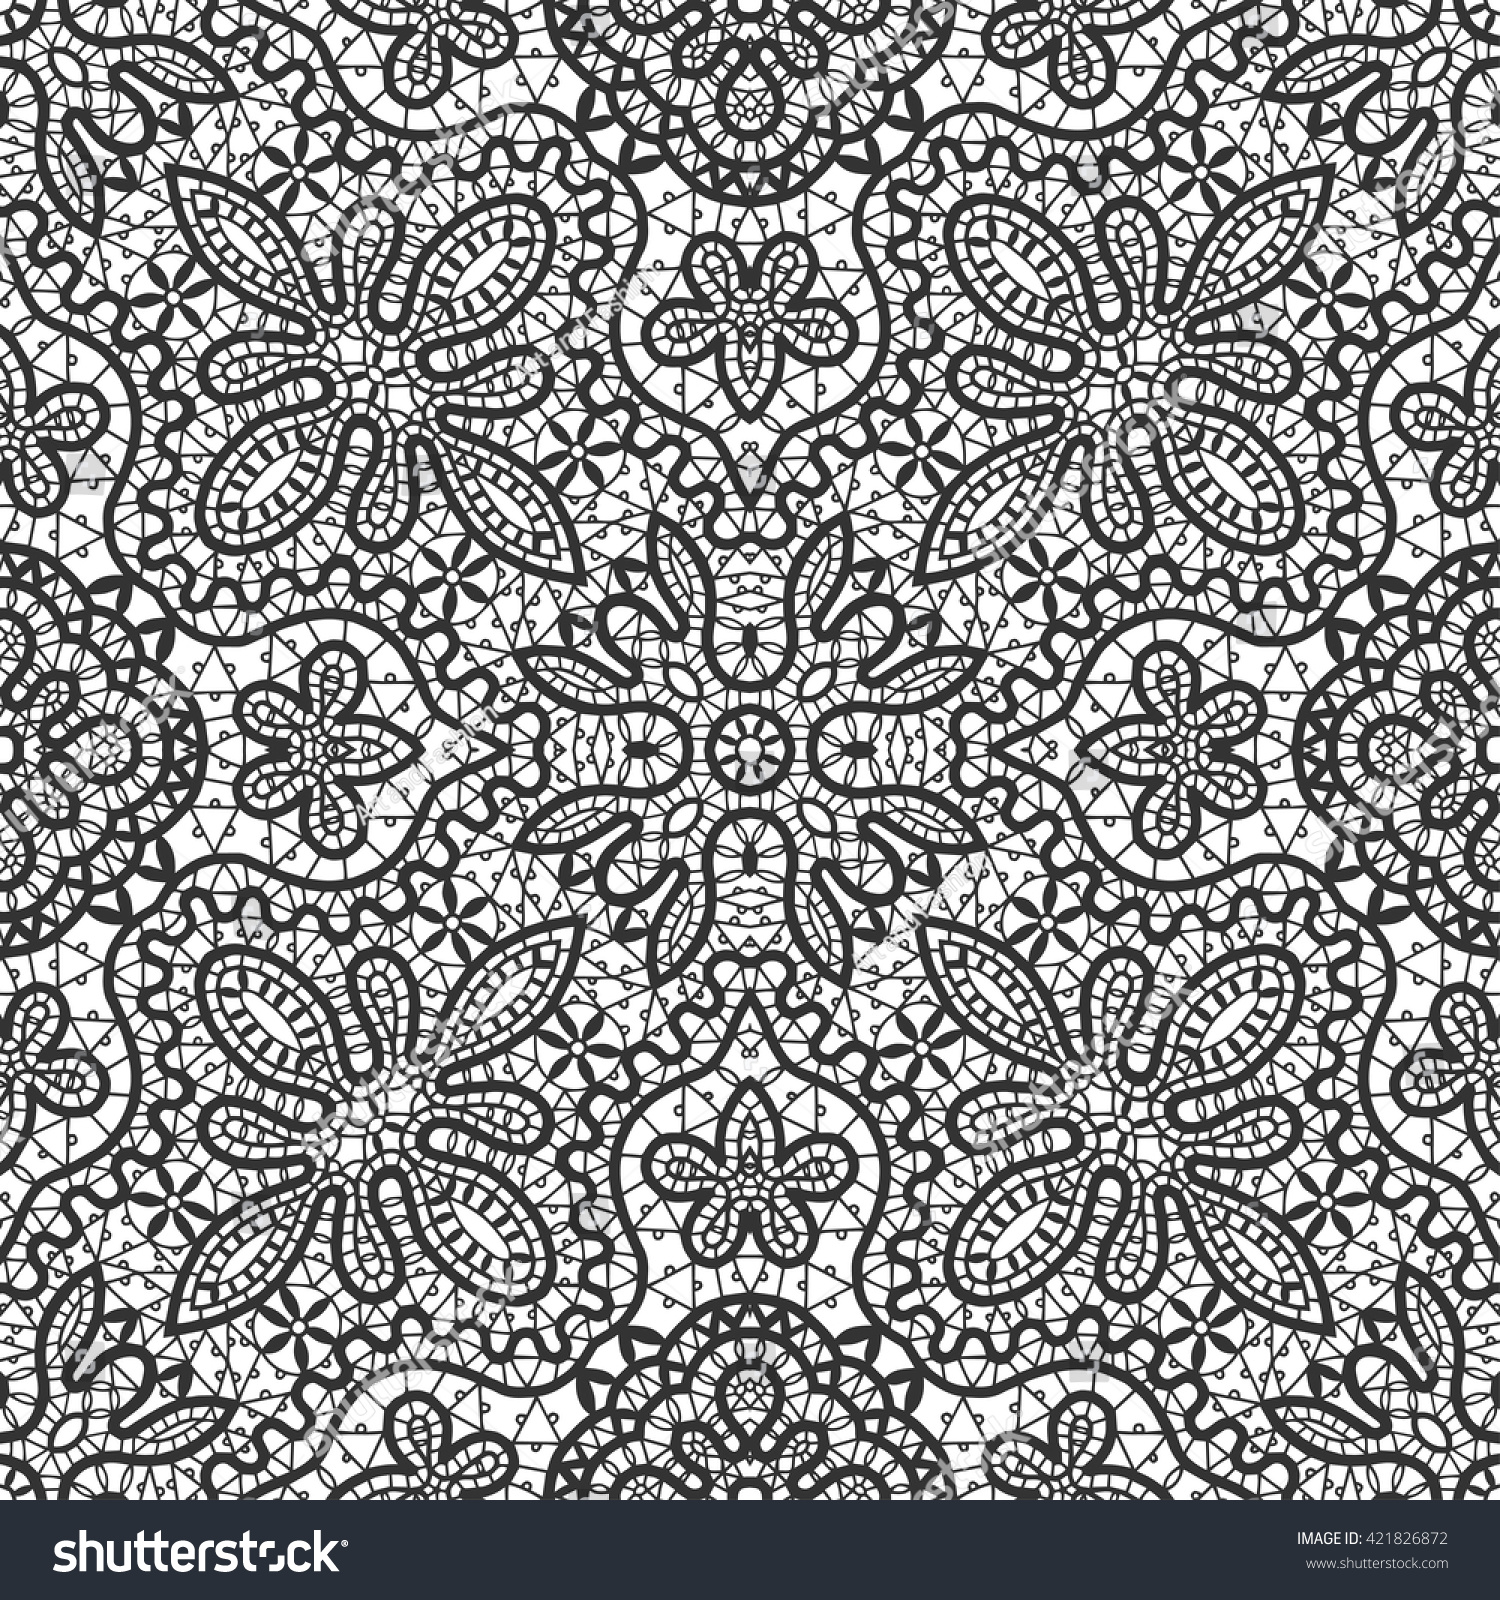 Black White Vector Seamless Lace Pattern Stock Vector (Royalty Free ...